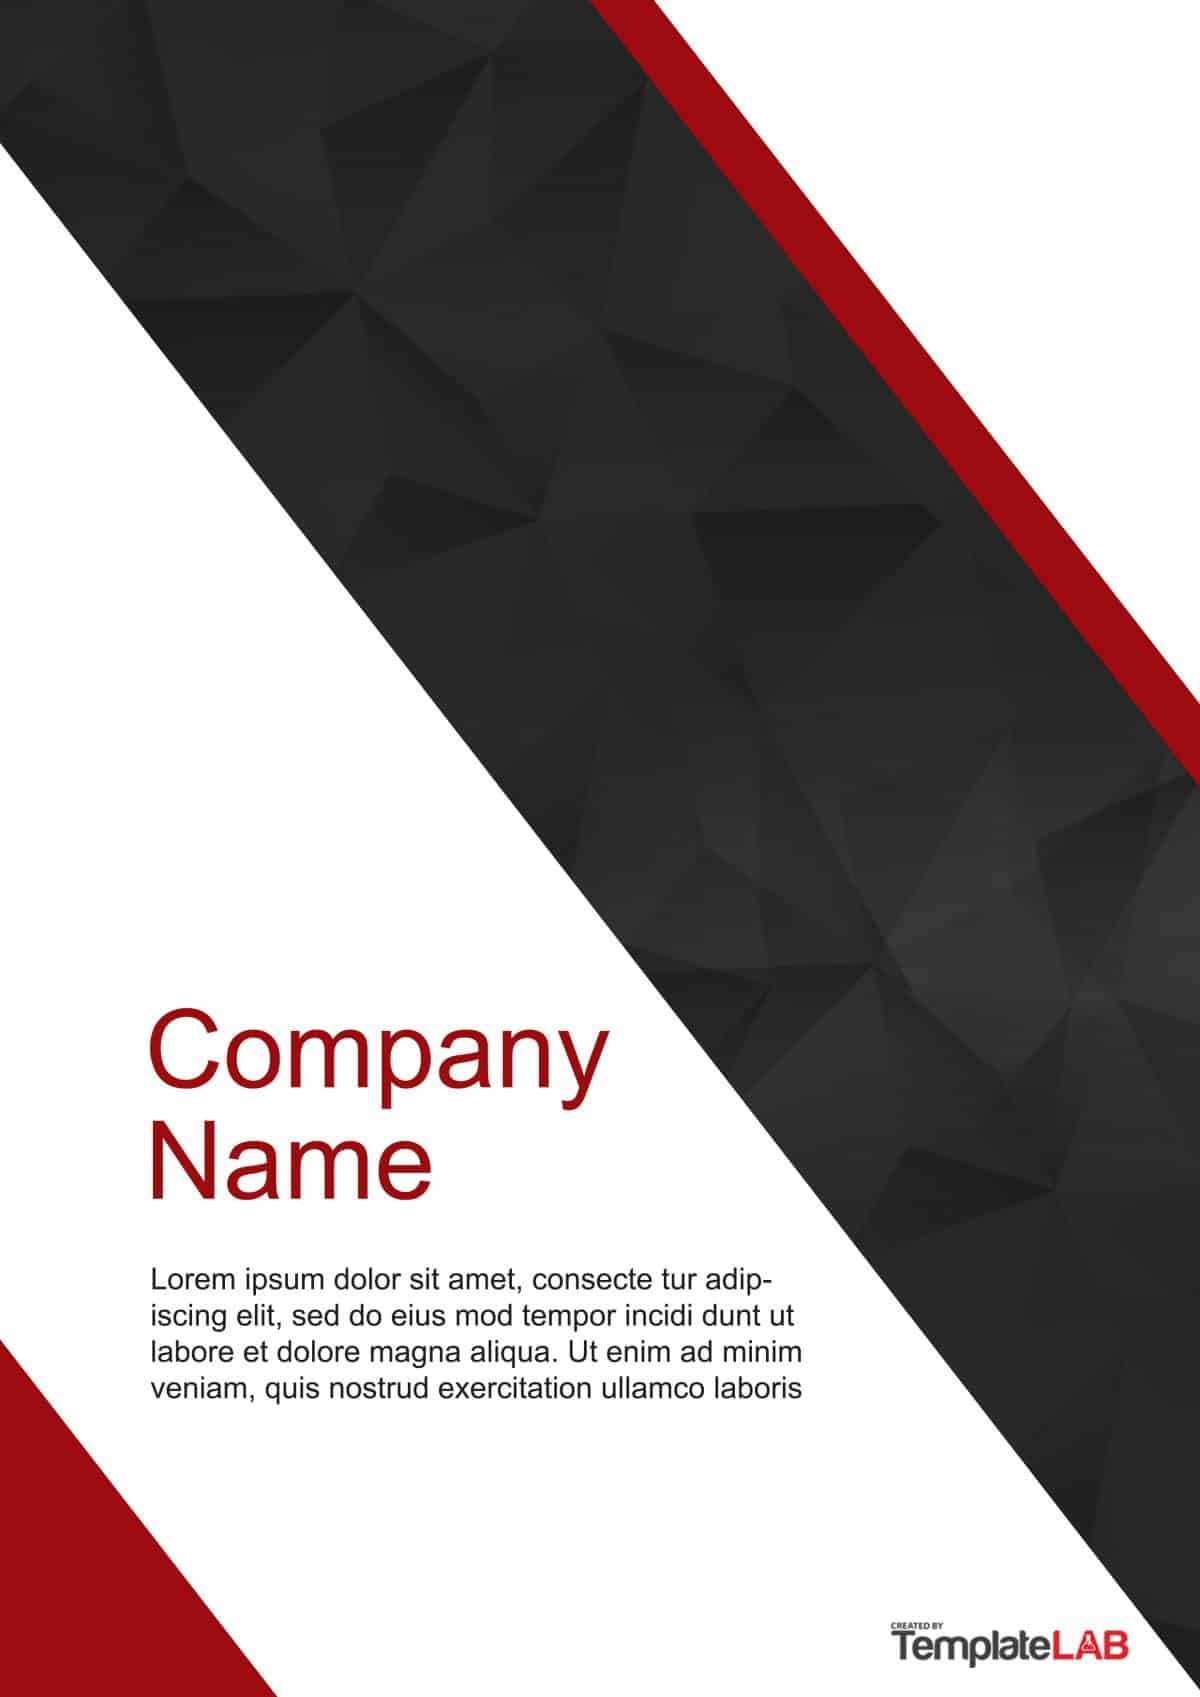 39 Amazing Cover Page Templates (Word + Psd) ᐅ Template Lab Throughout Word Title Page Templates